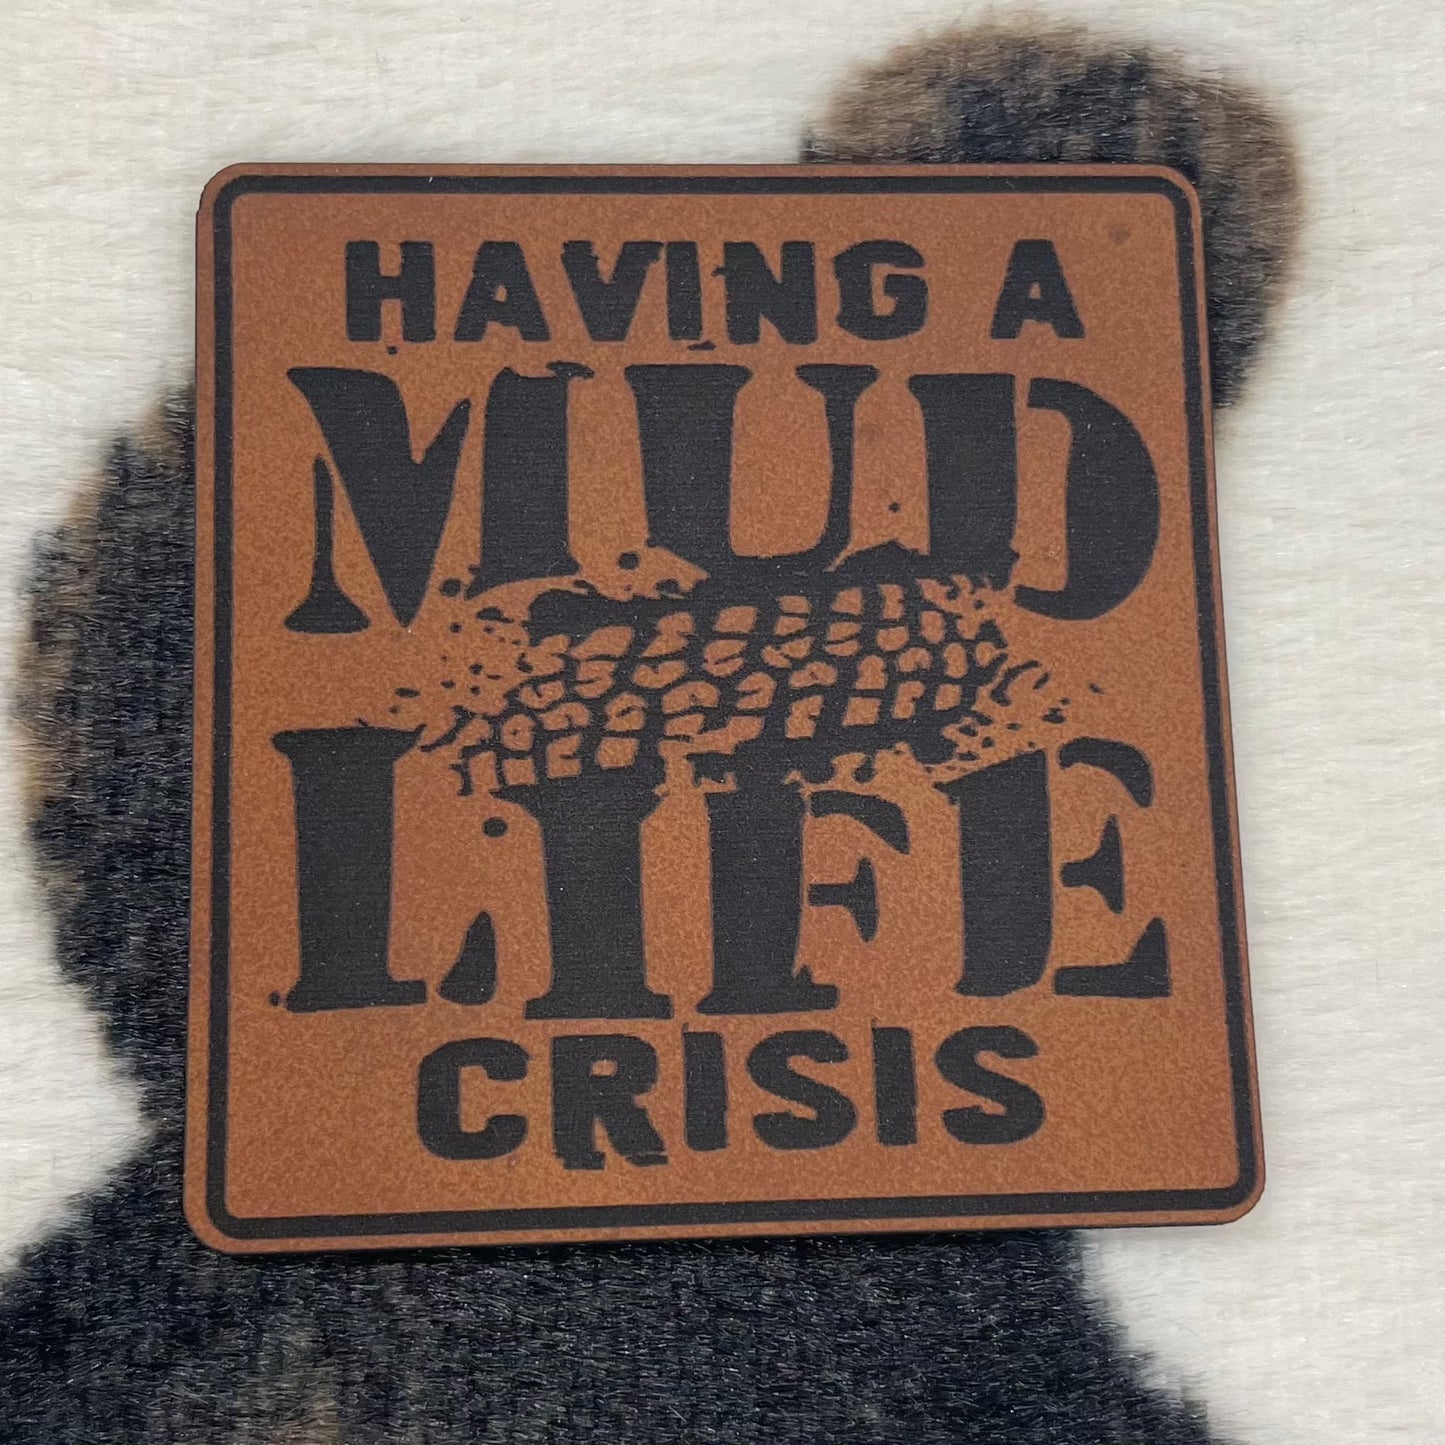 Having a Mud Life Crisis- 2.15" wide x 2.25" tall Leatherette Patch